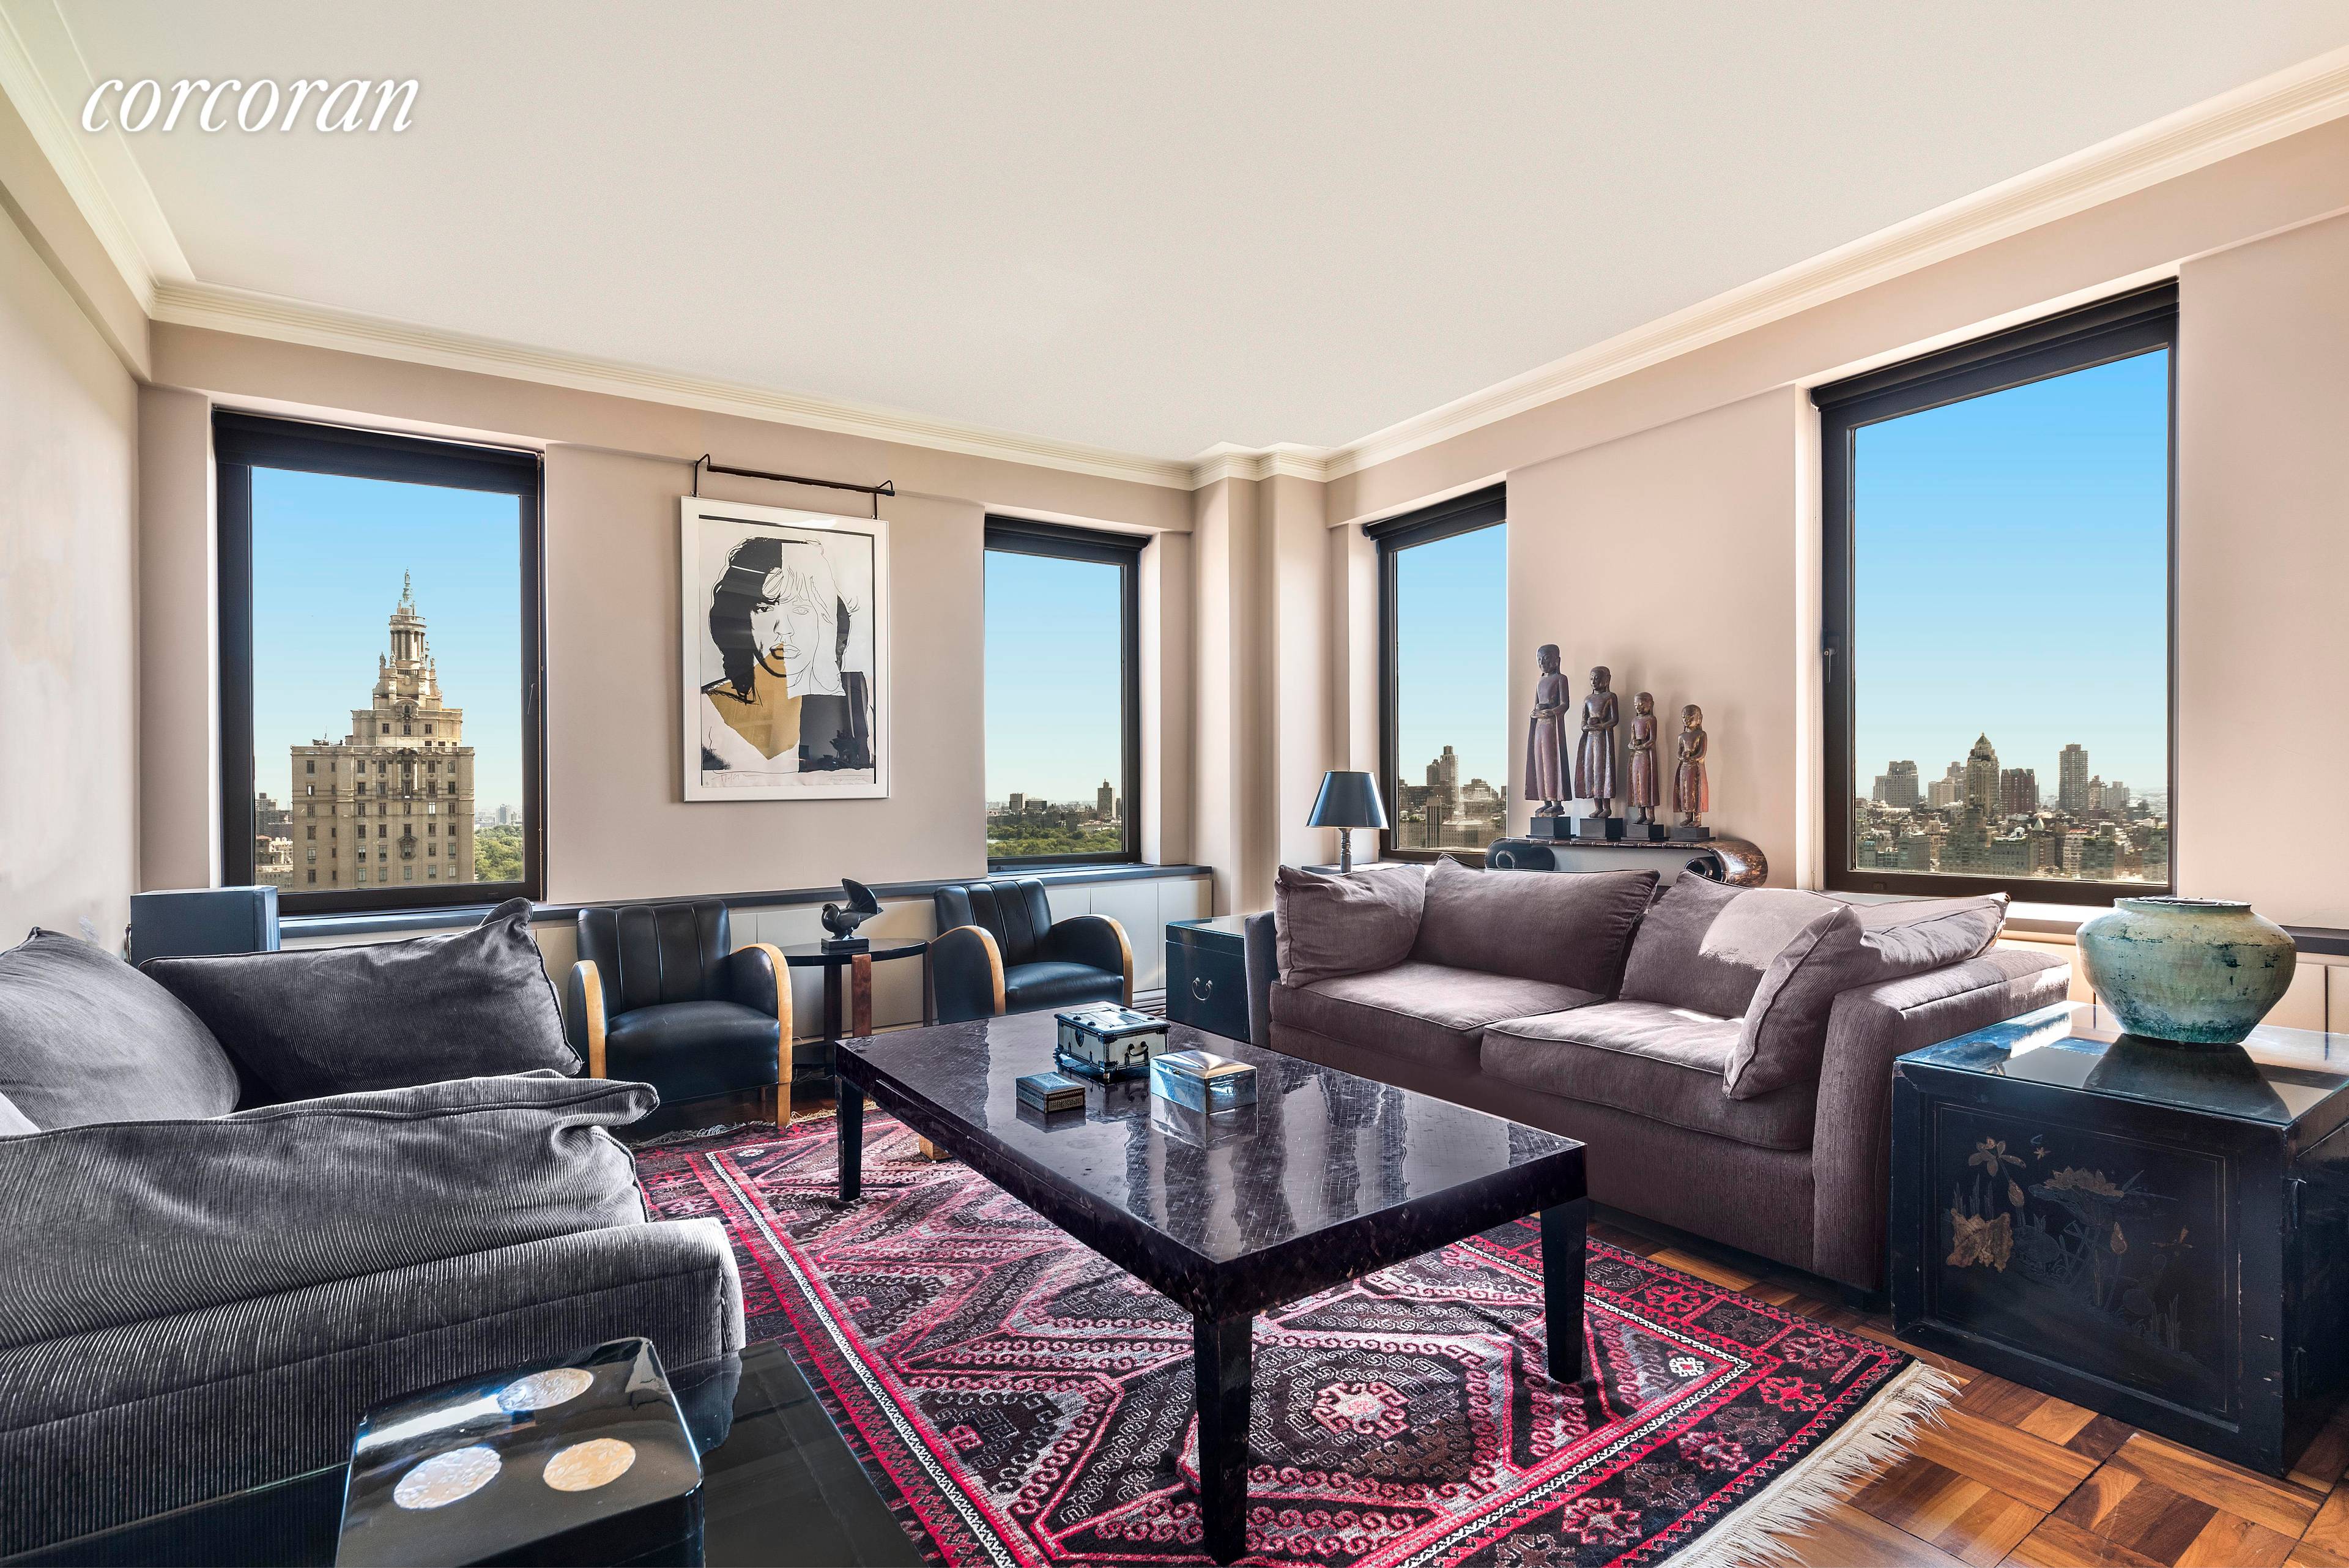 Seize this rare opportunity to own a full floor tower residence at The Majestic on Central Park West and 72nd Street.